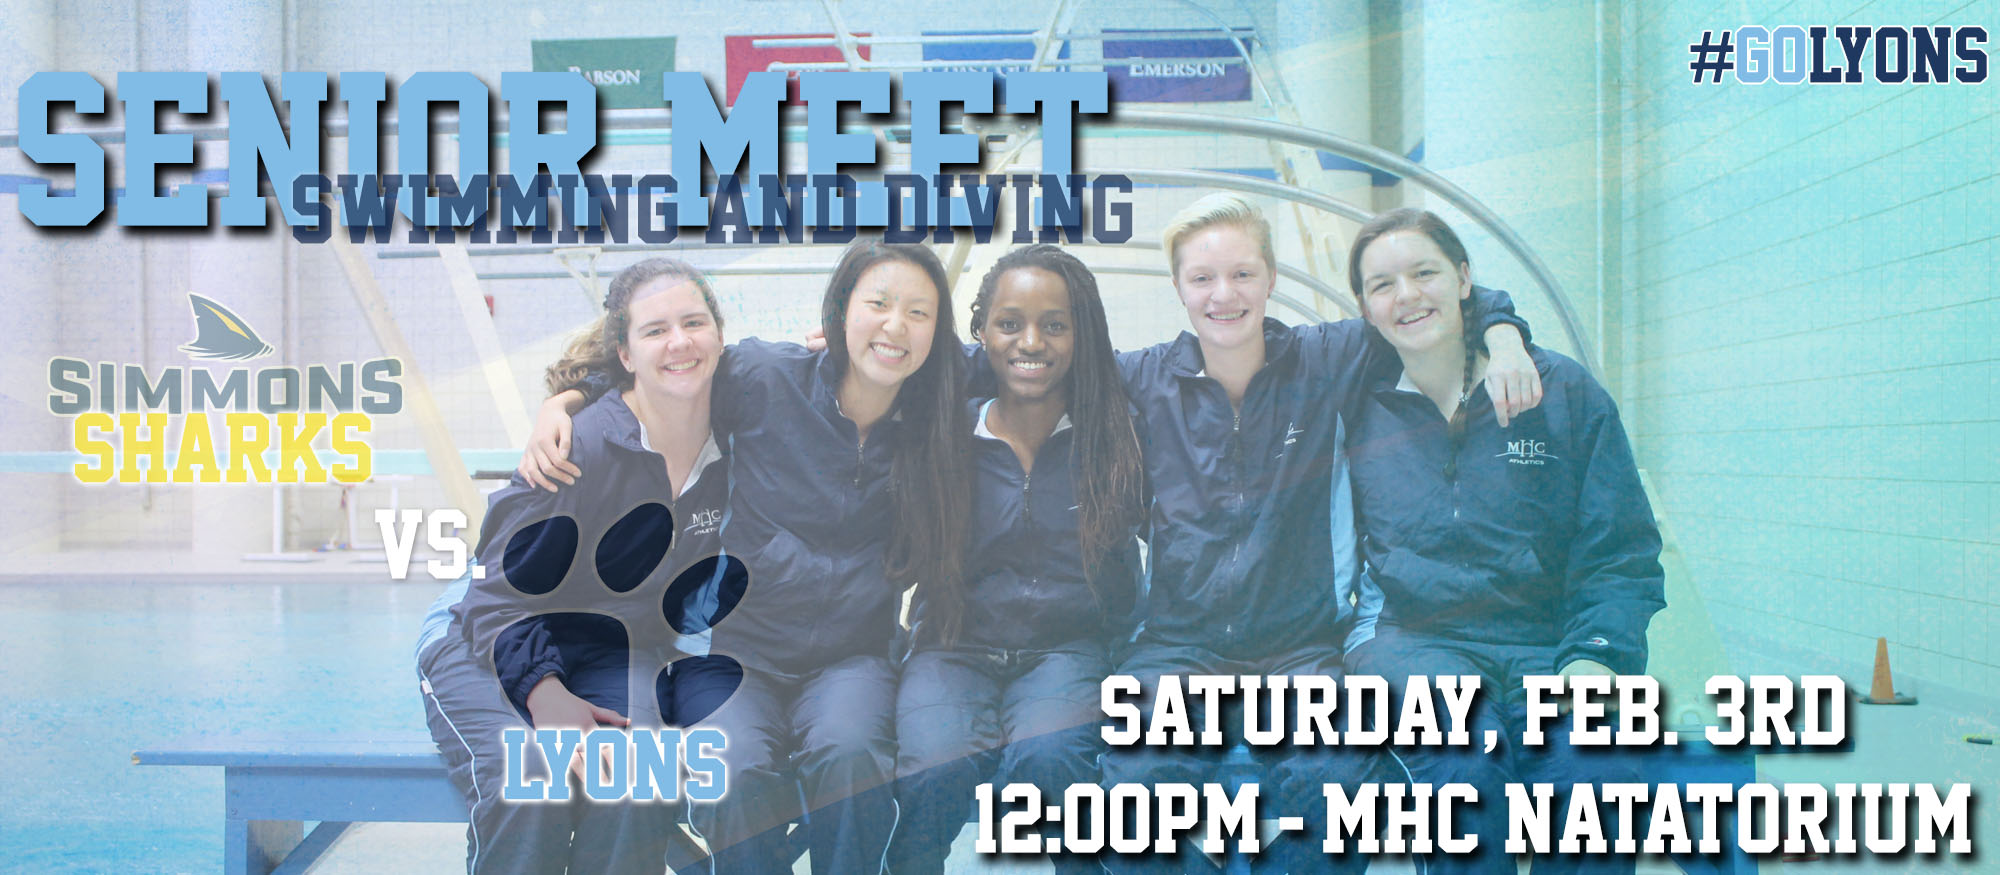 Graphic advertising the Saturday, February 2nd Lyons swimming & diving home meet at 12pm against Simmons. The event also marks Senior Day for the Lyons five graduating seniors.